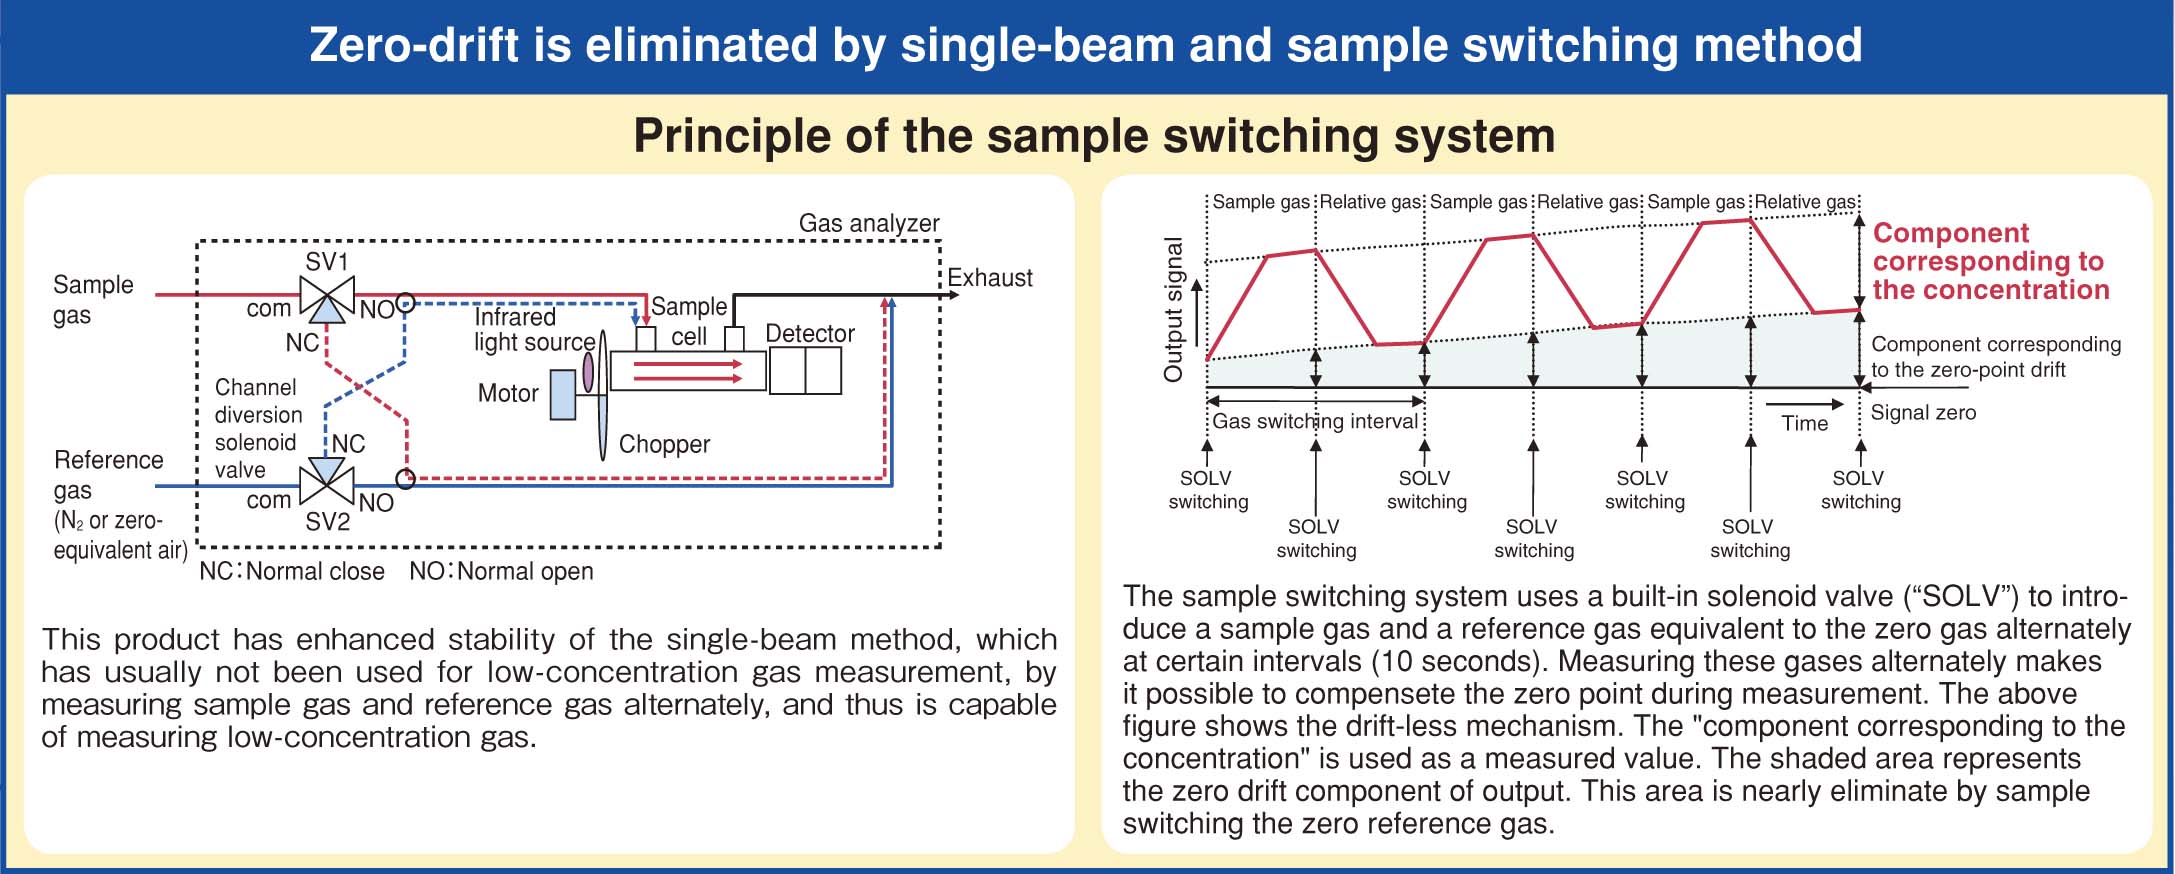 "Sample switching system